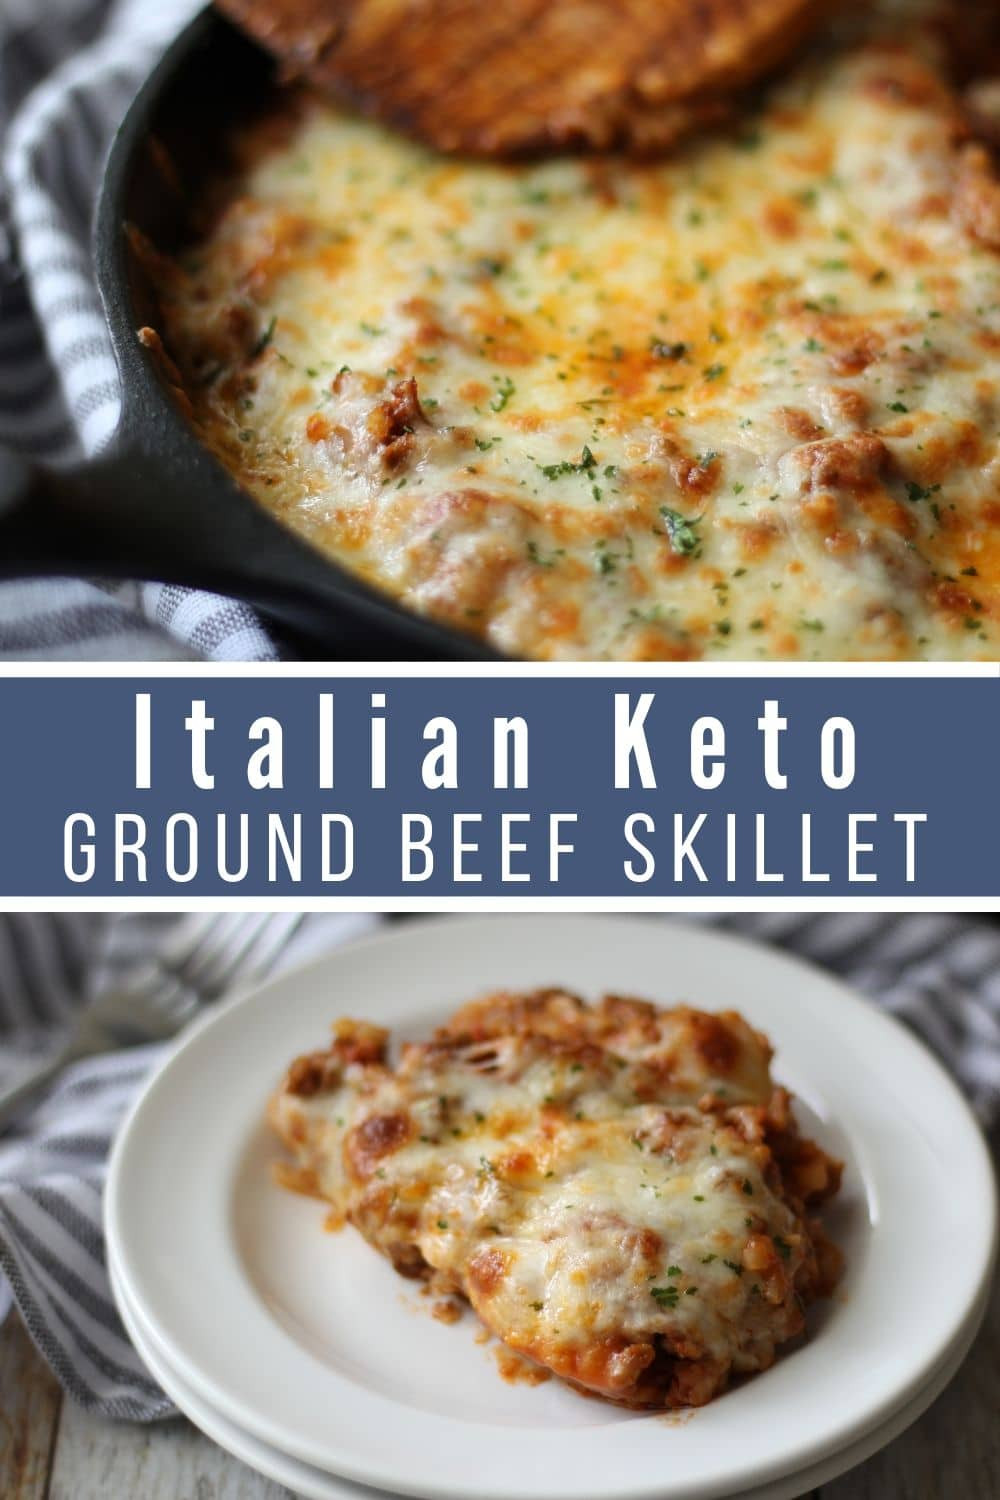 Ground Beef Keto Recipes Low Carb
 Low Carb Ground Beef Recipe Italian Keto Beef Skillet